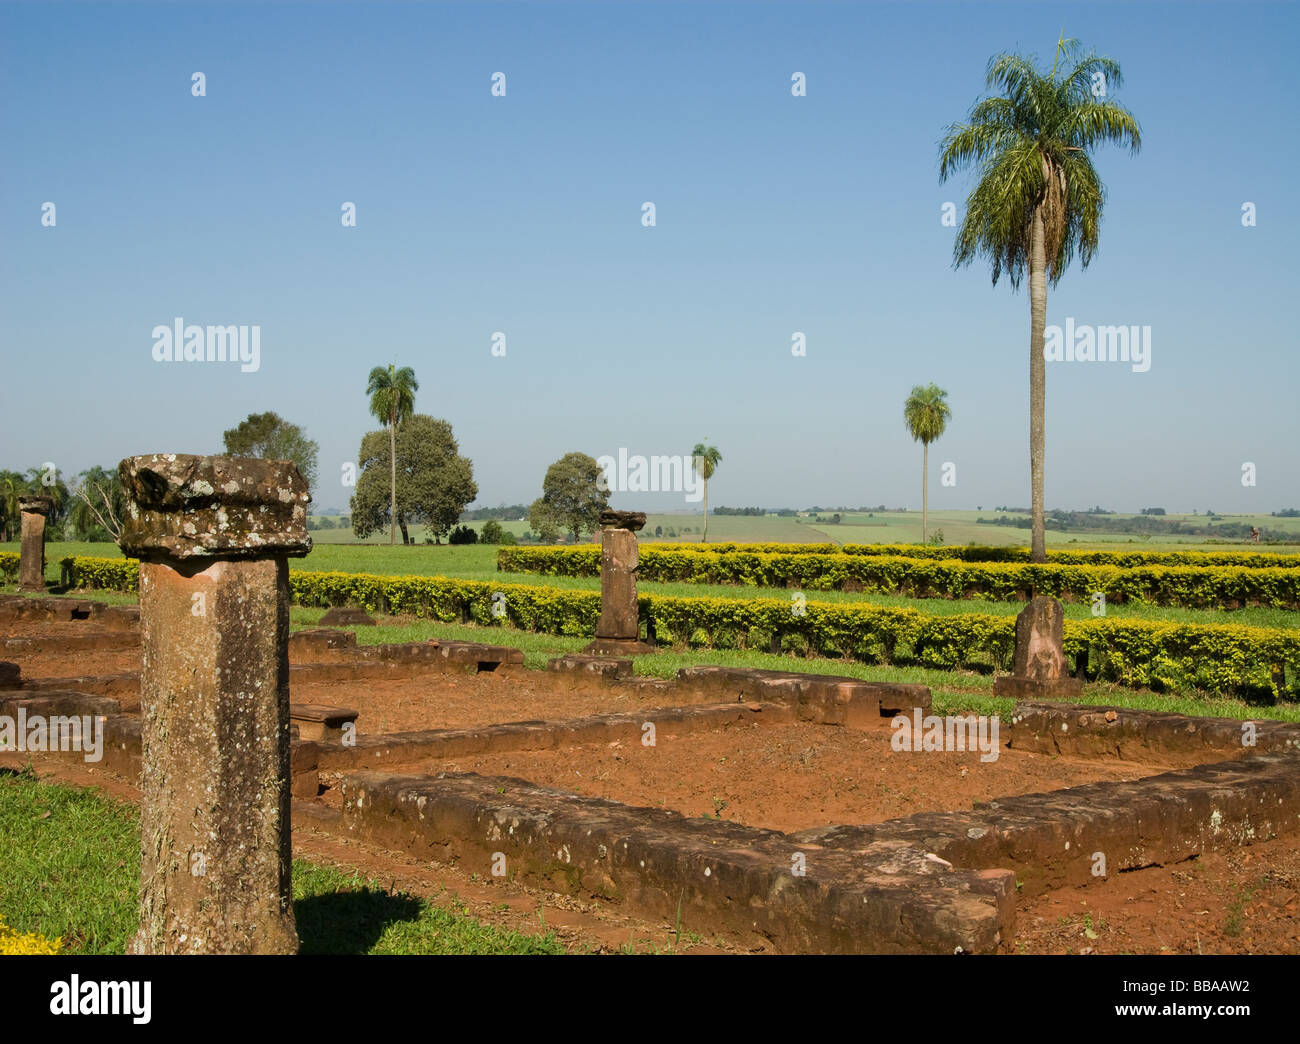 Paraguay.Jesuits Reductions. Reduction of Jésus.Home oh indians.UNESCO World Heritage Site. Stock Photo